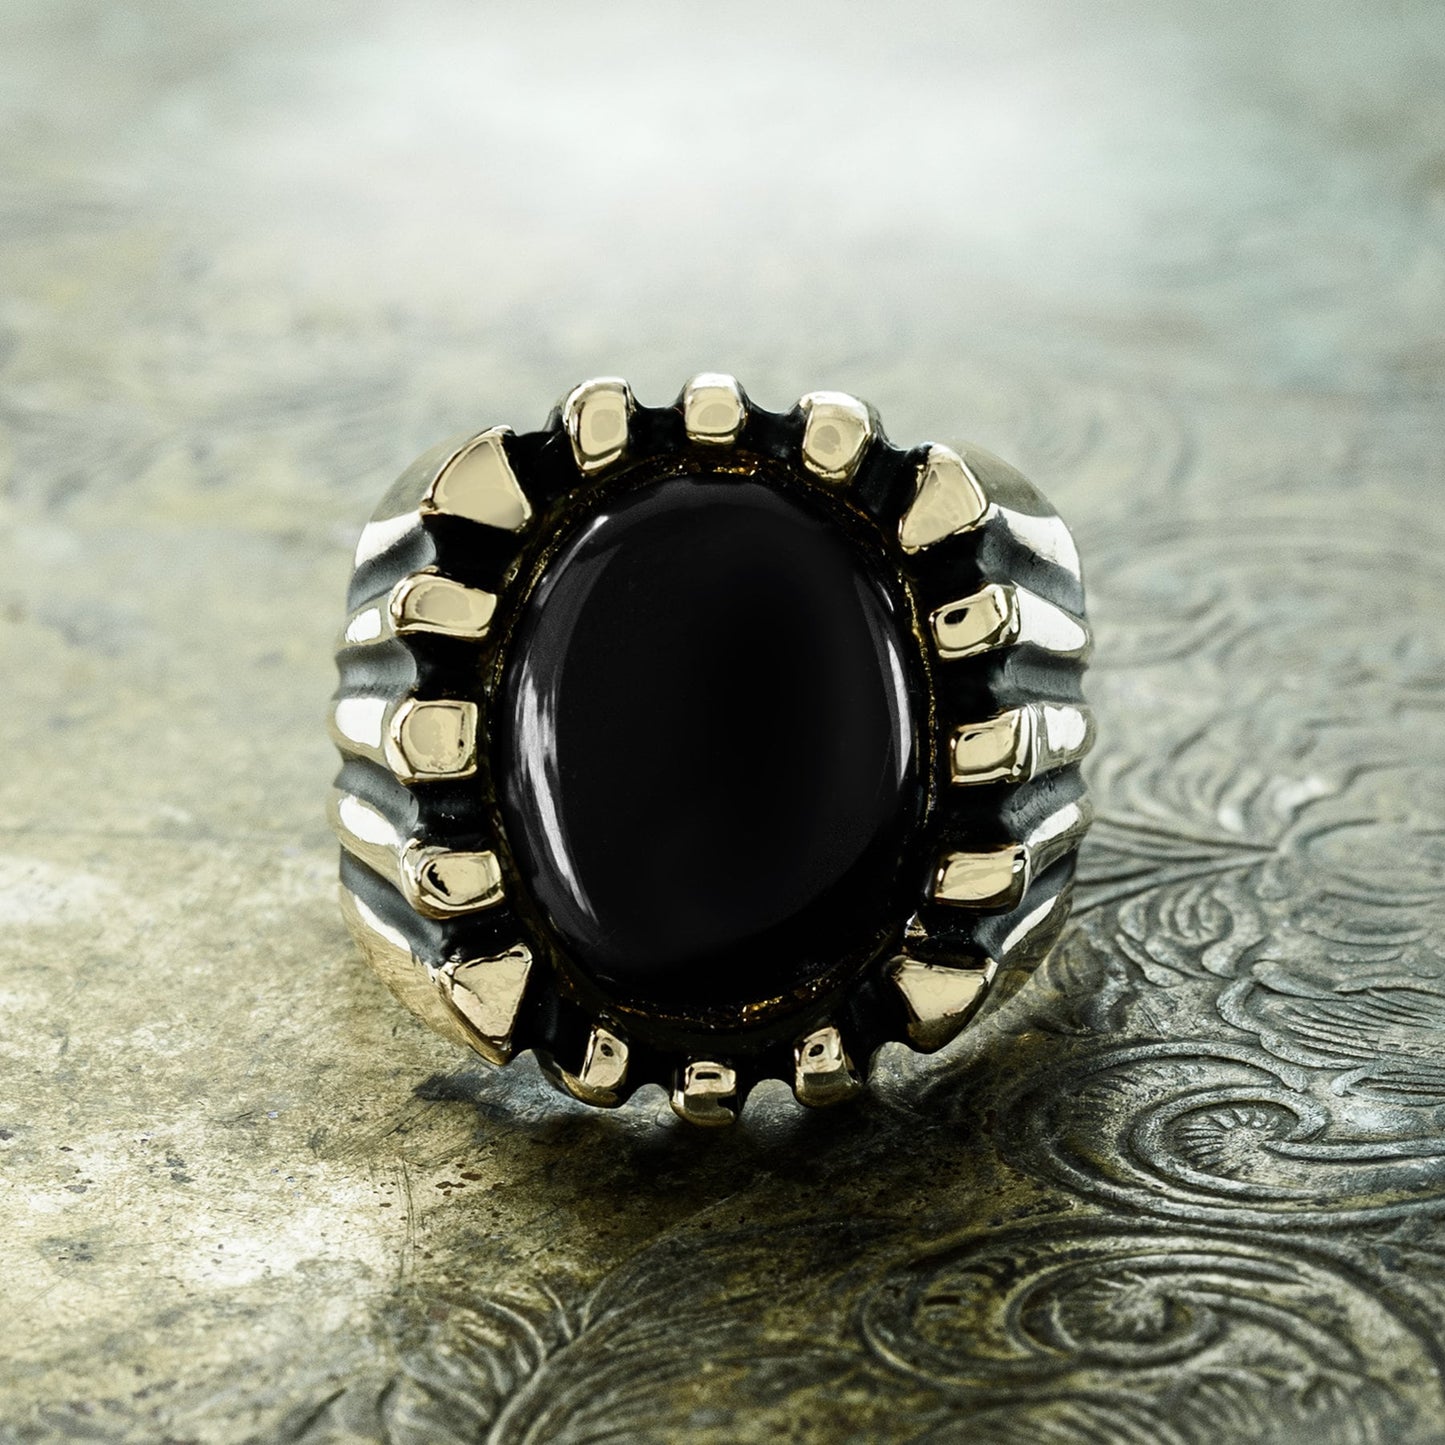 Vintage Ring 1980s Mens Genuine Onyx Antique 18kt Gold Plated Ring Man Jewelry #R1960 - Limited Stock - Never Worn